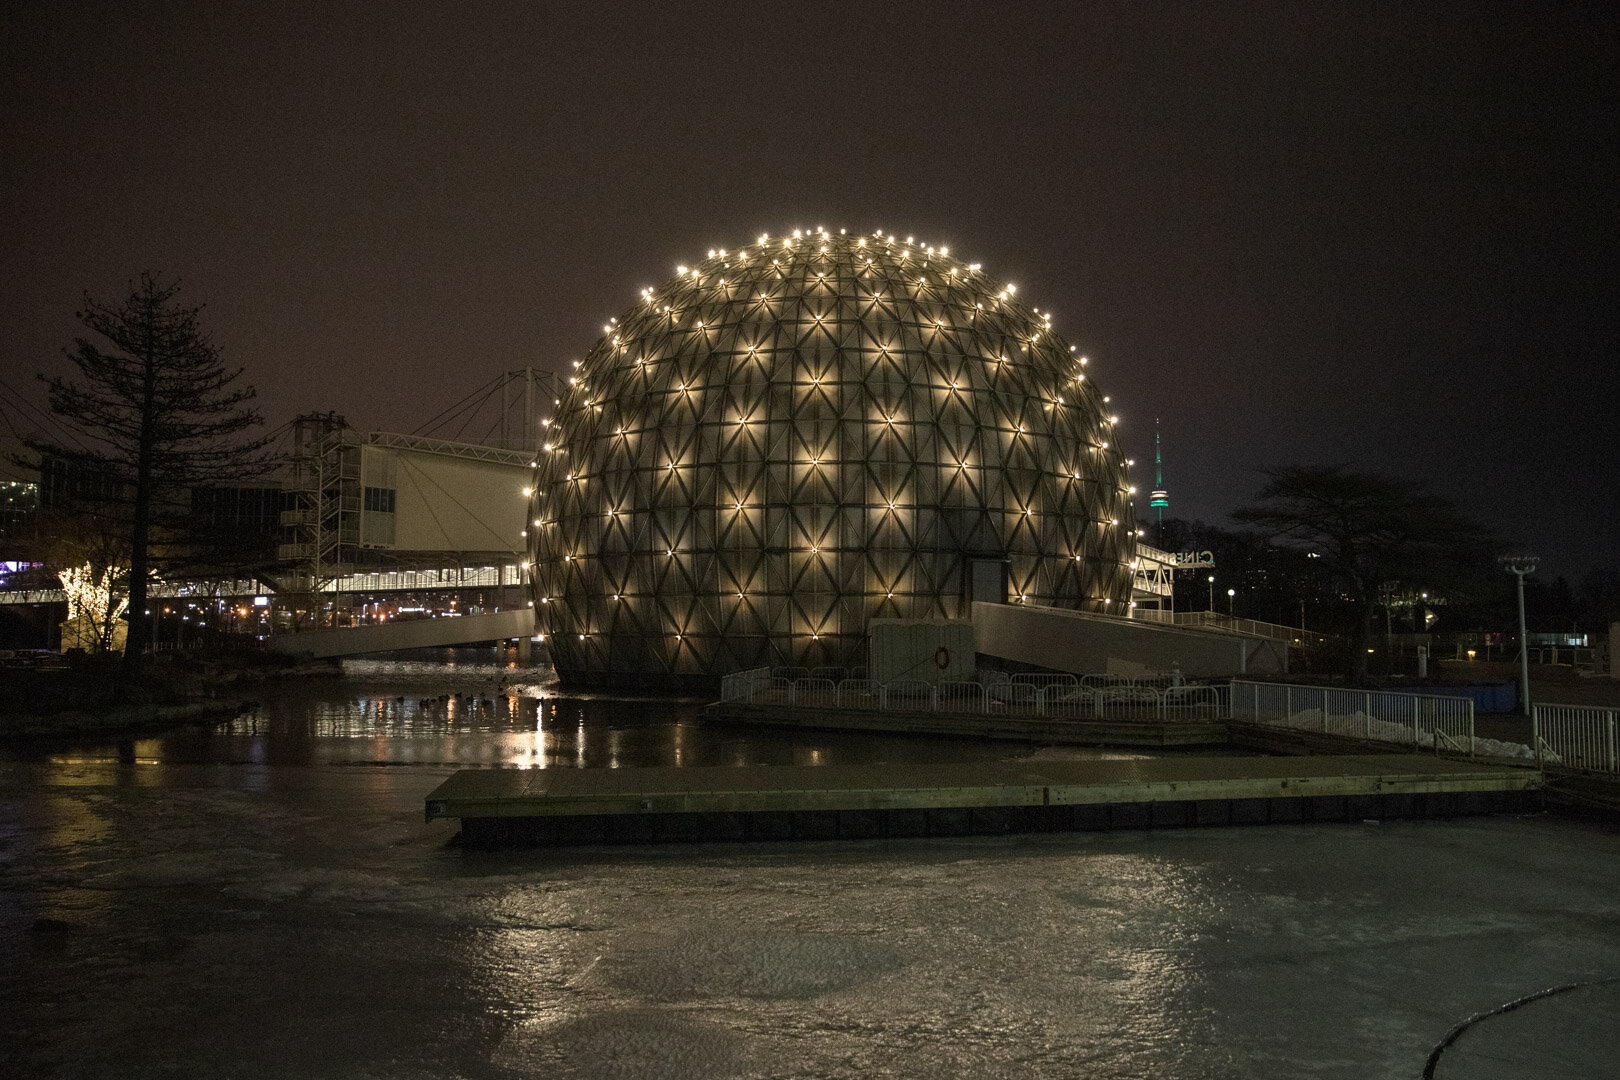  The Triodetic Dome of the Cinesphere lit up at night leaves people in amazement.  